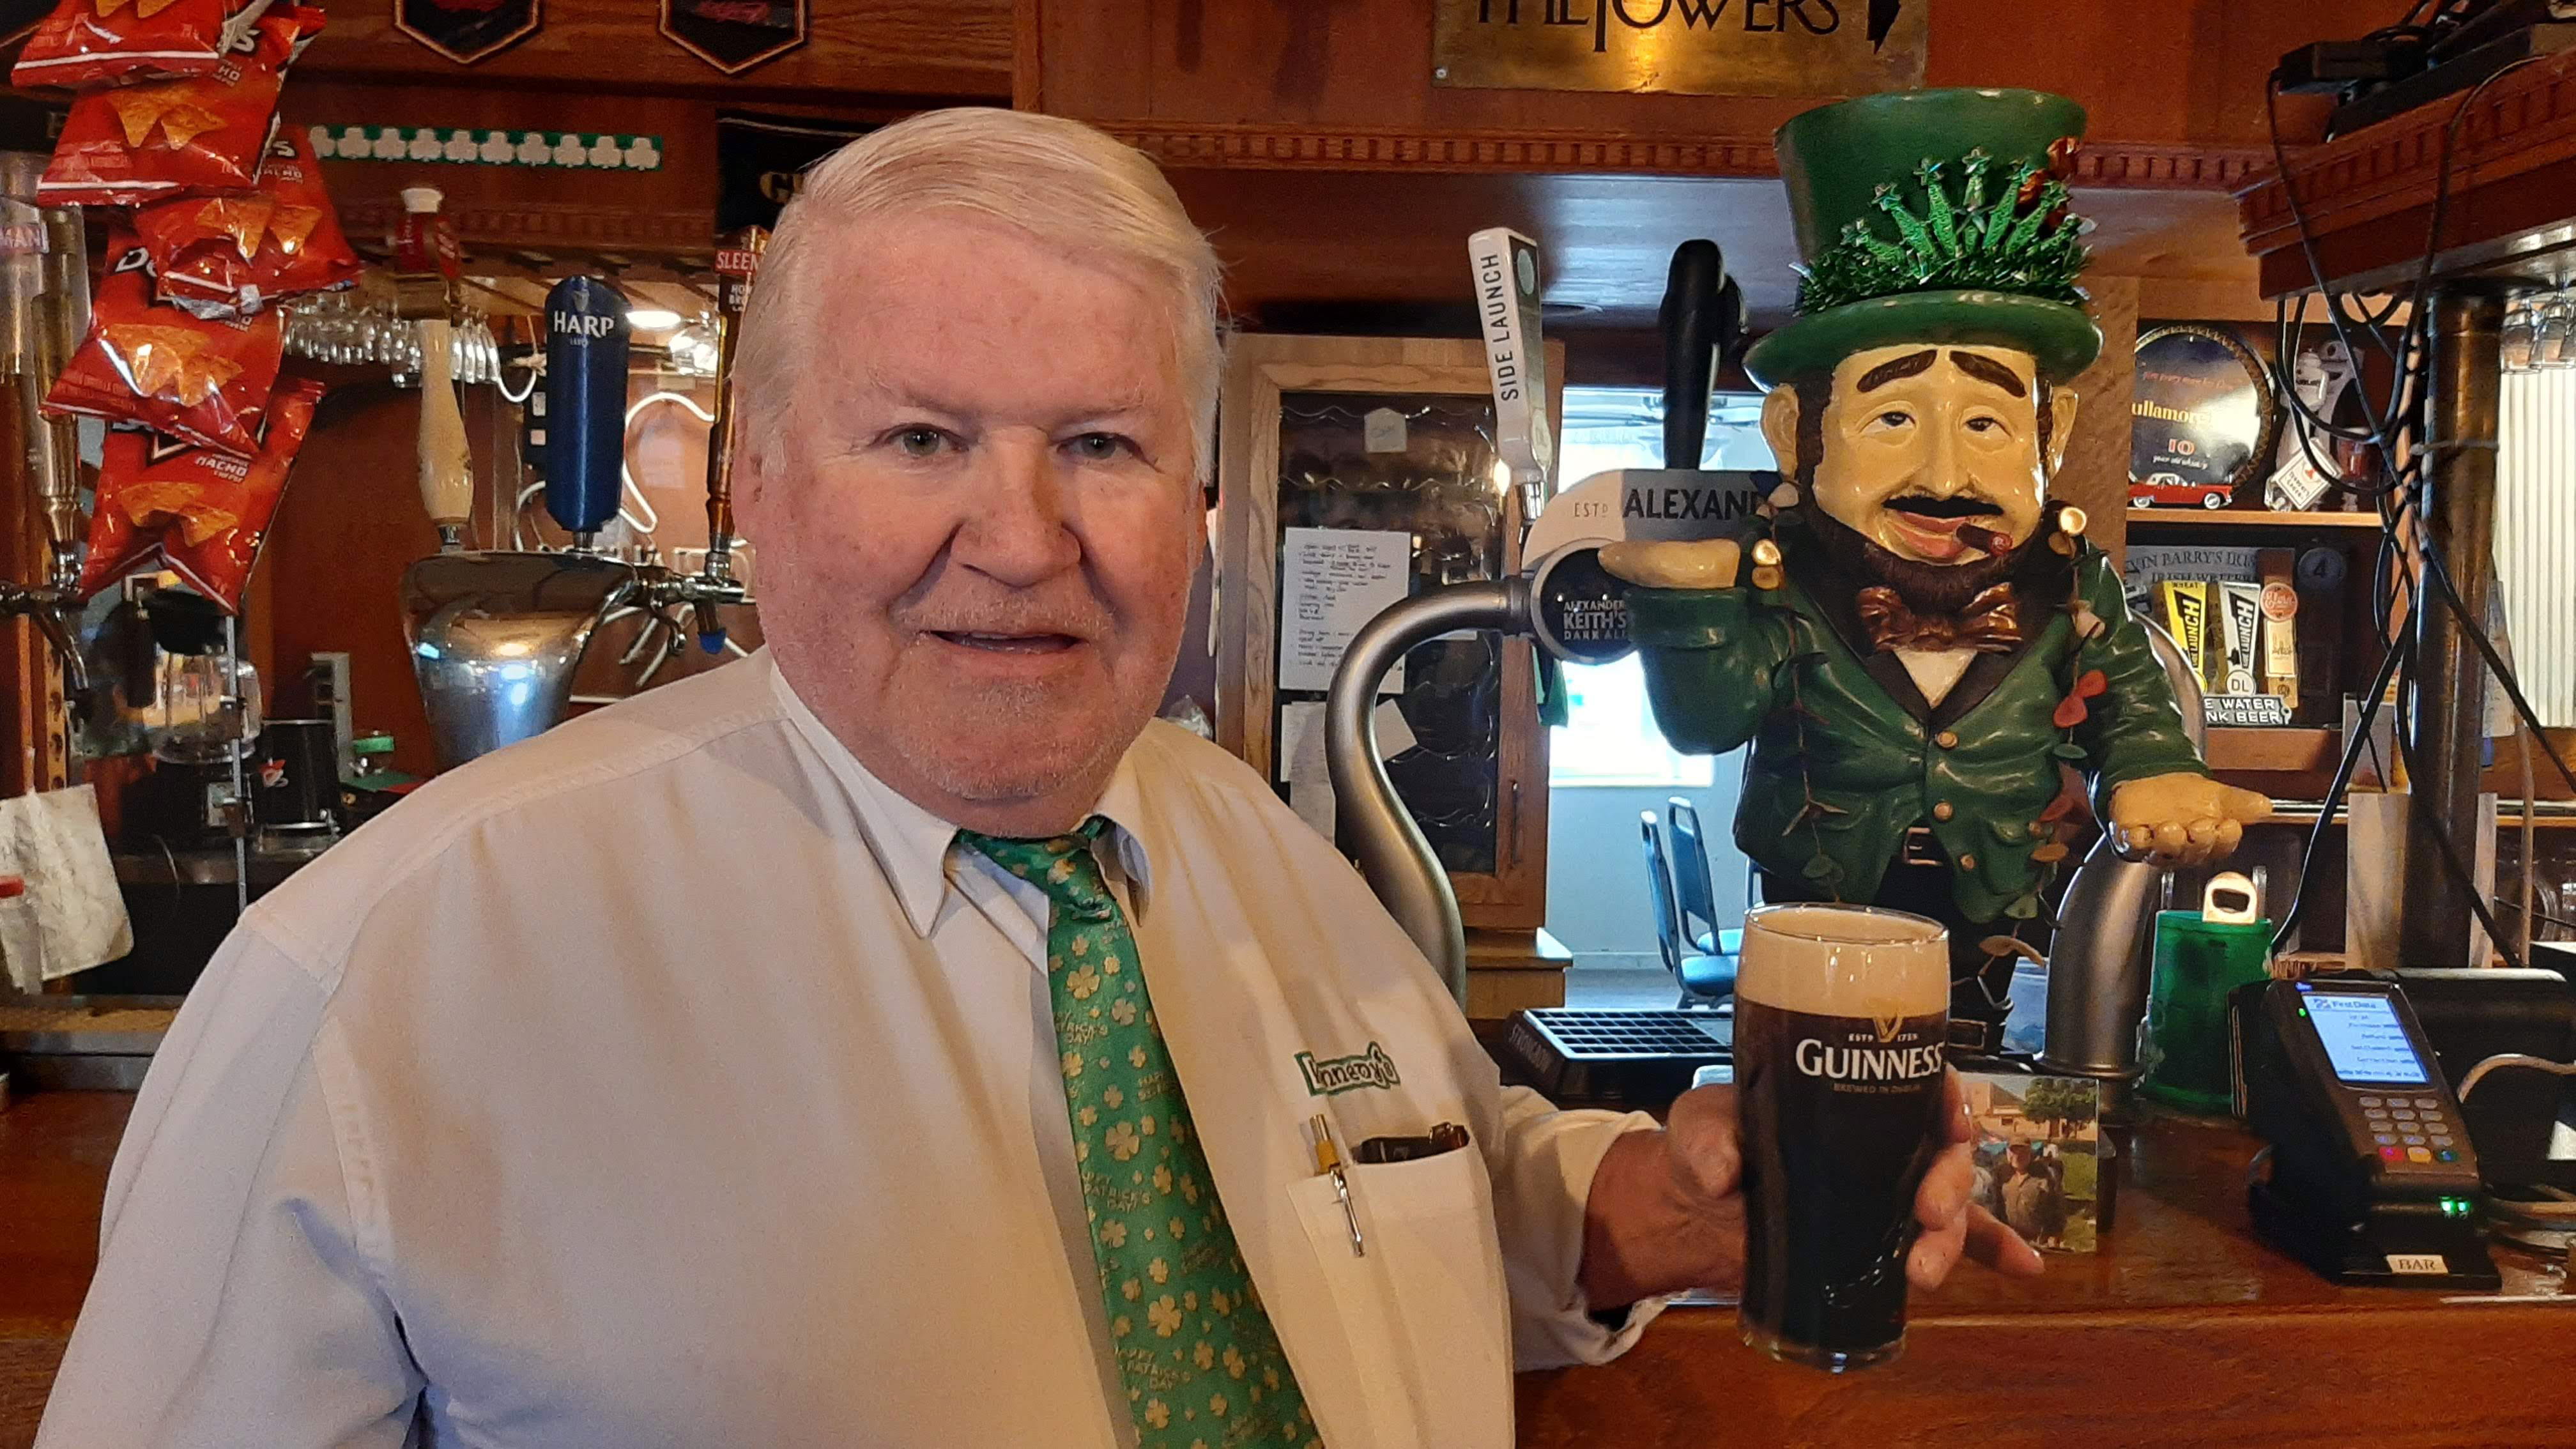 Sláinte! Mike Kennedy with a pint of “the dark stuff”, Guinness, which is one of the popular drinks that will be served over the St. Patrick’s Day weekend.